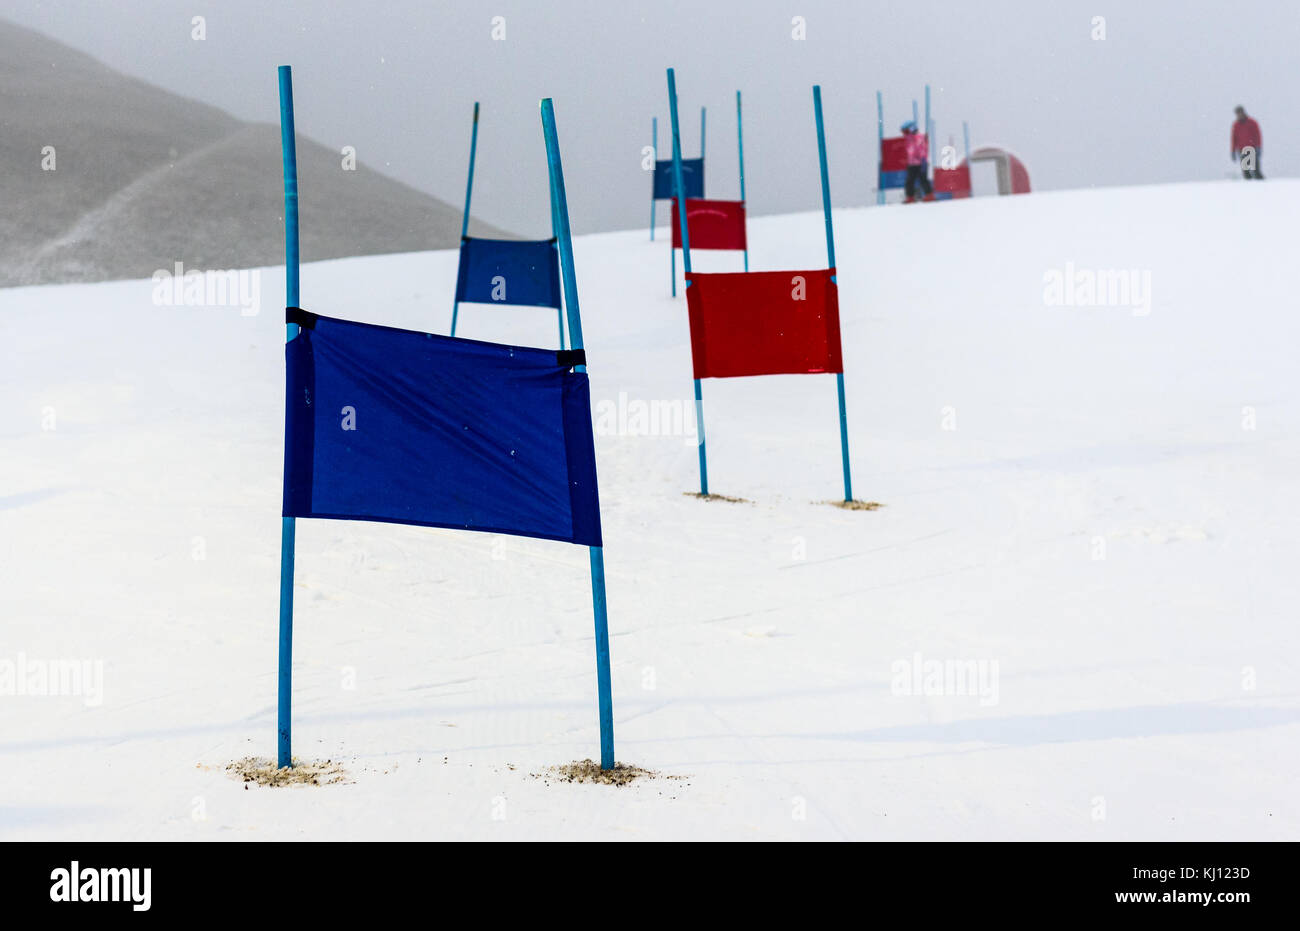 Children skiing slalom racing track with blue and red gates. Small ski race gates on a pole with children skiing in the background. Stock Photo